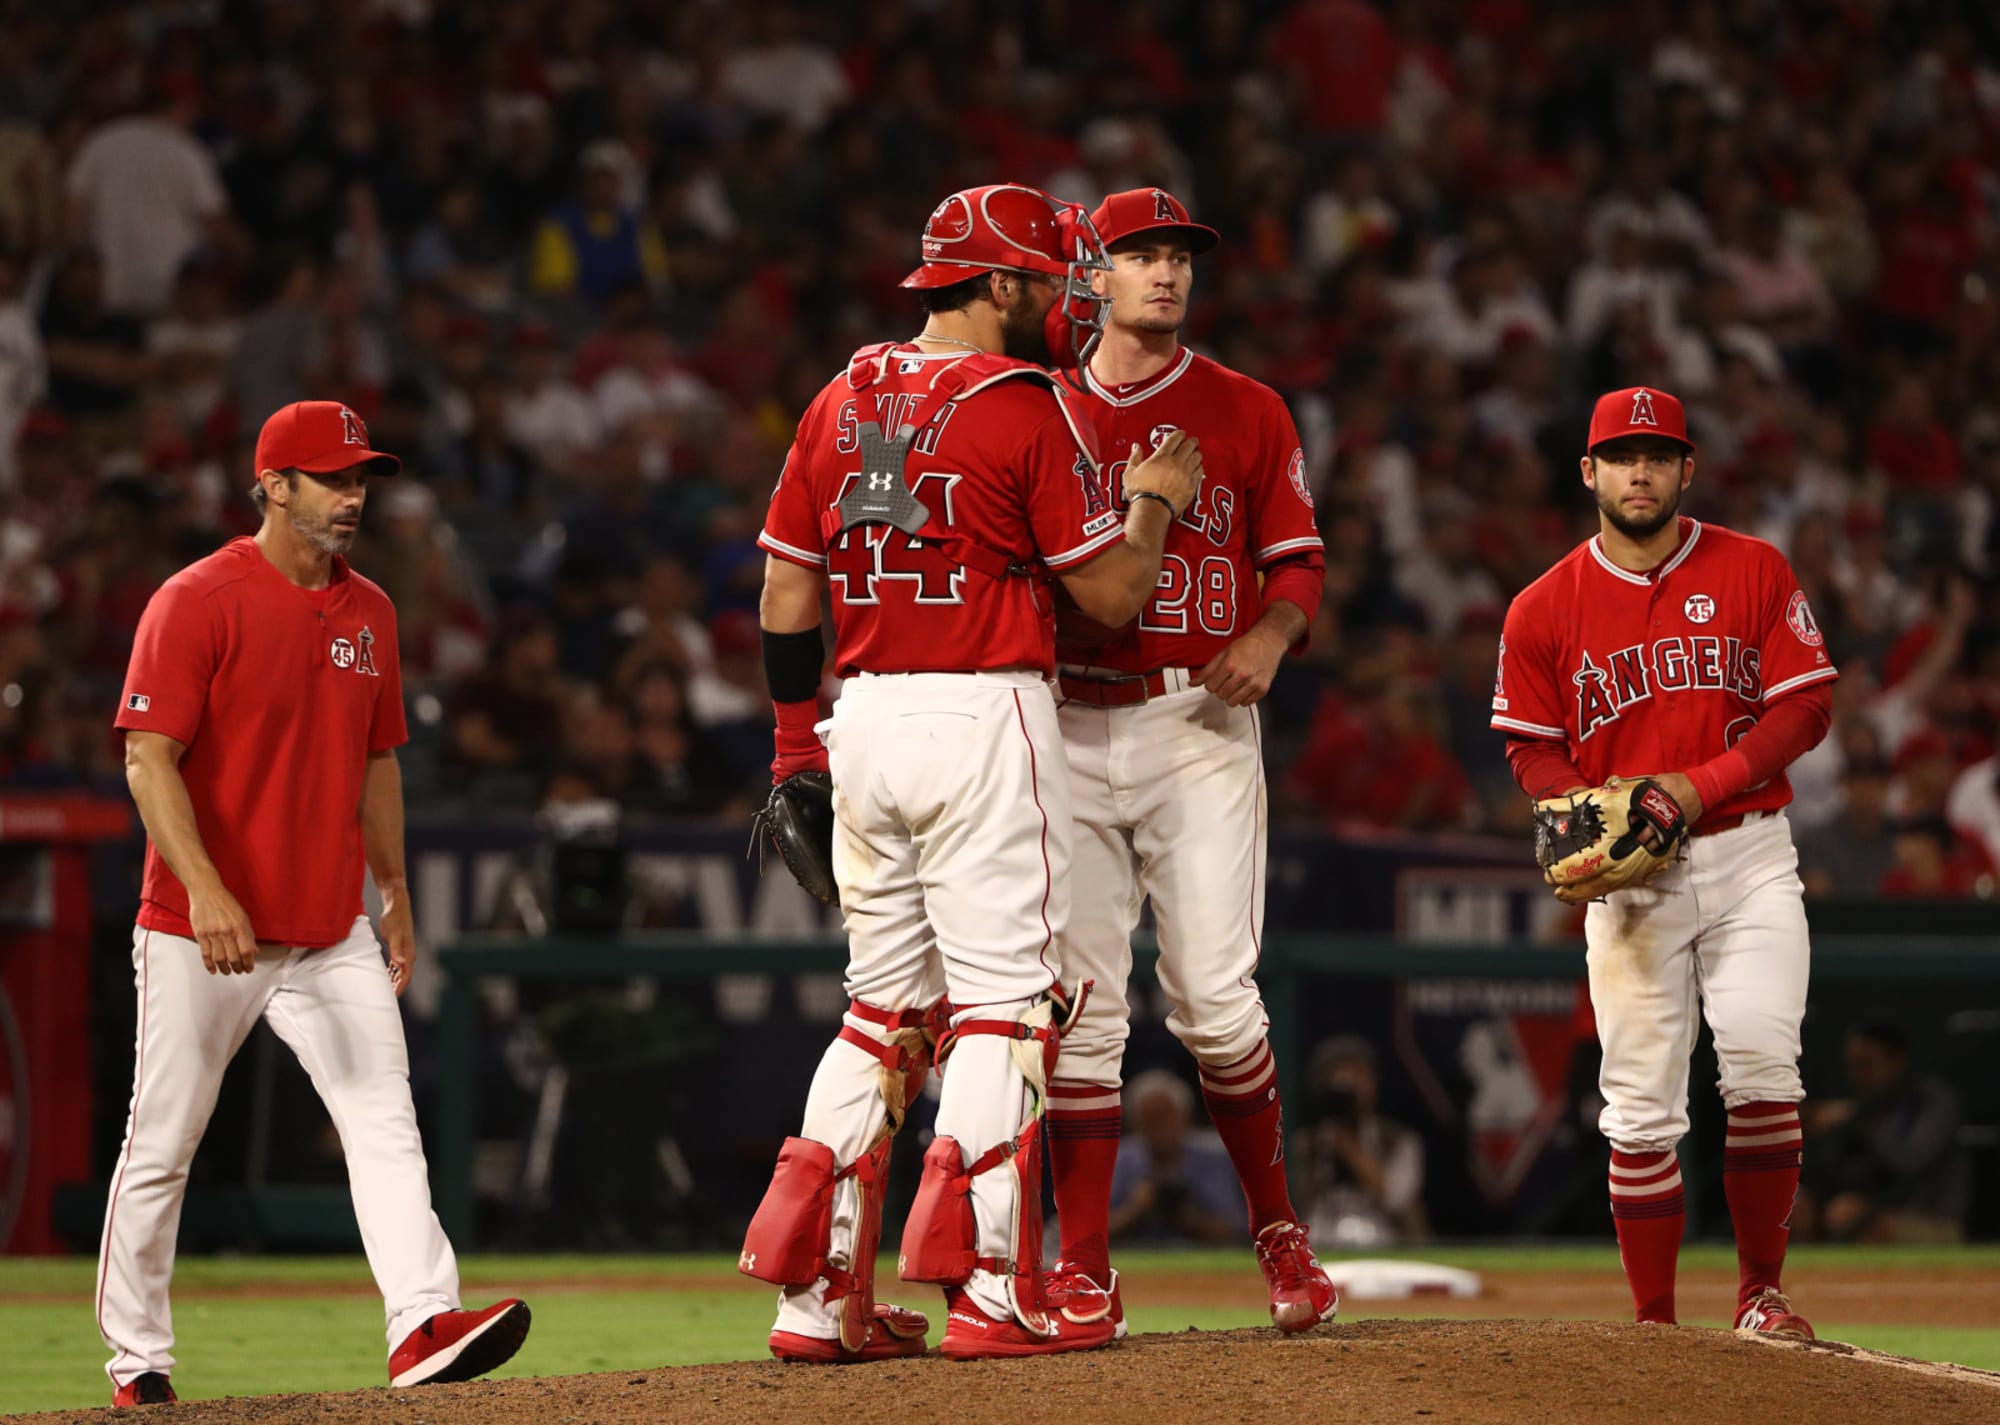 LA Angels: Who is the greatest catcher in franchise history?